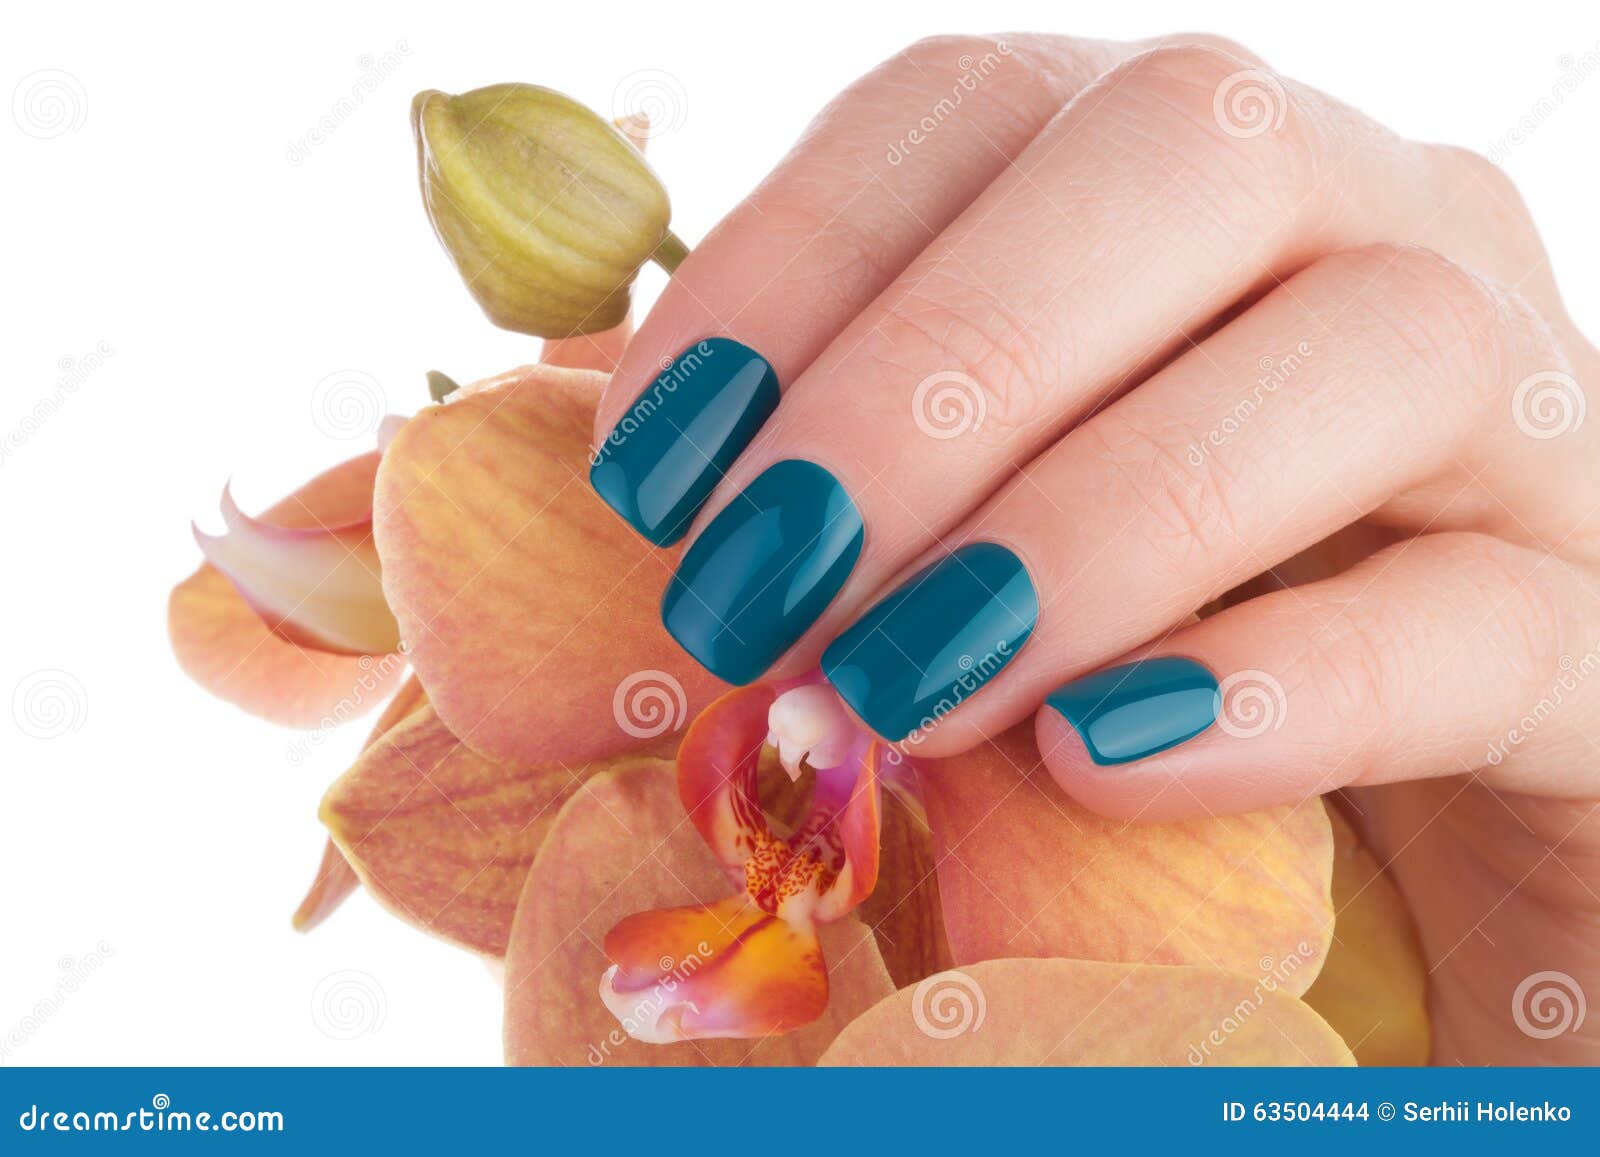 Nice and neat green nails. stock photo. Image of manicure - 63504444